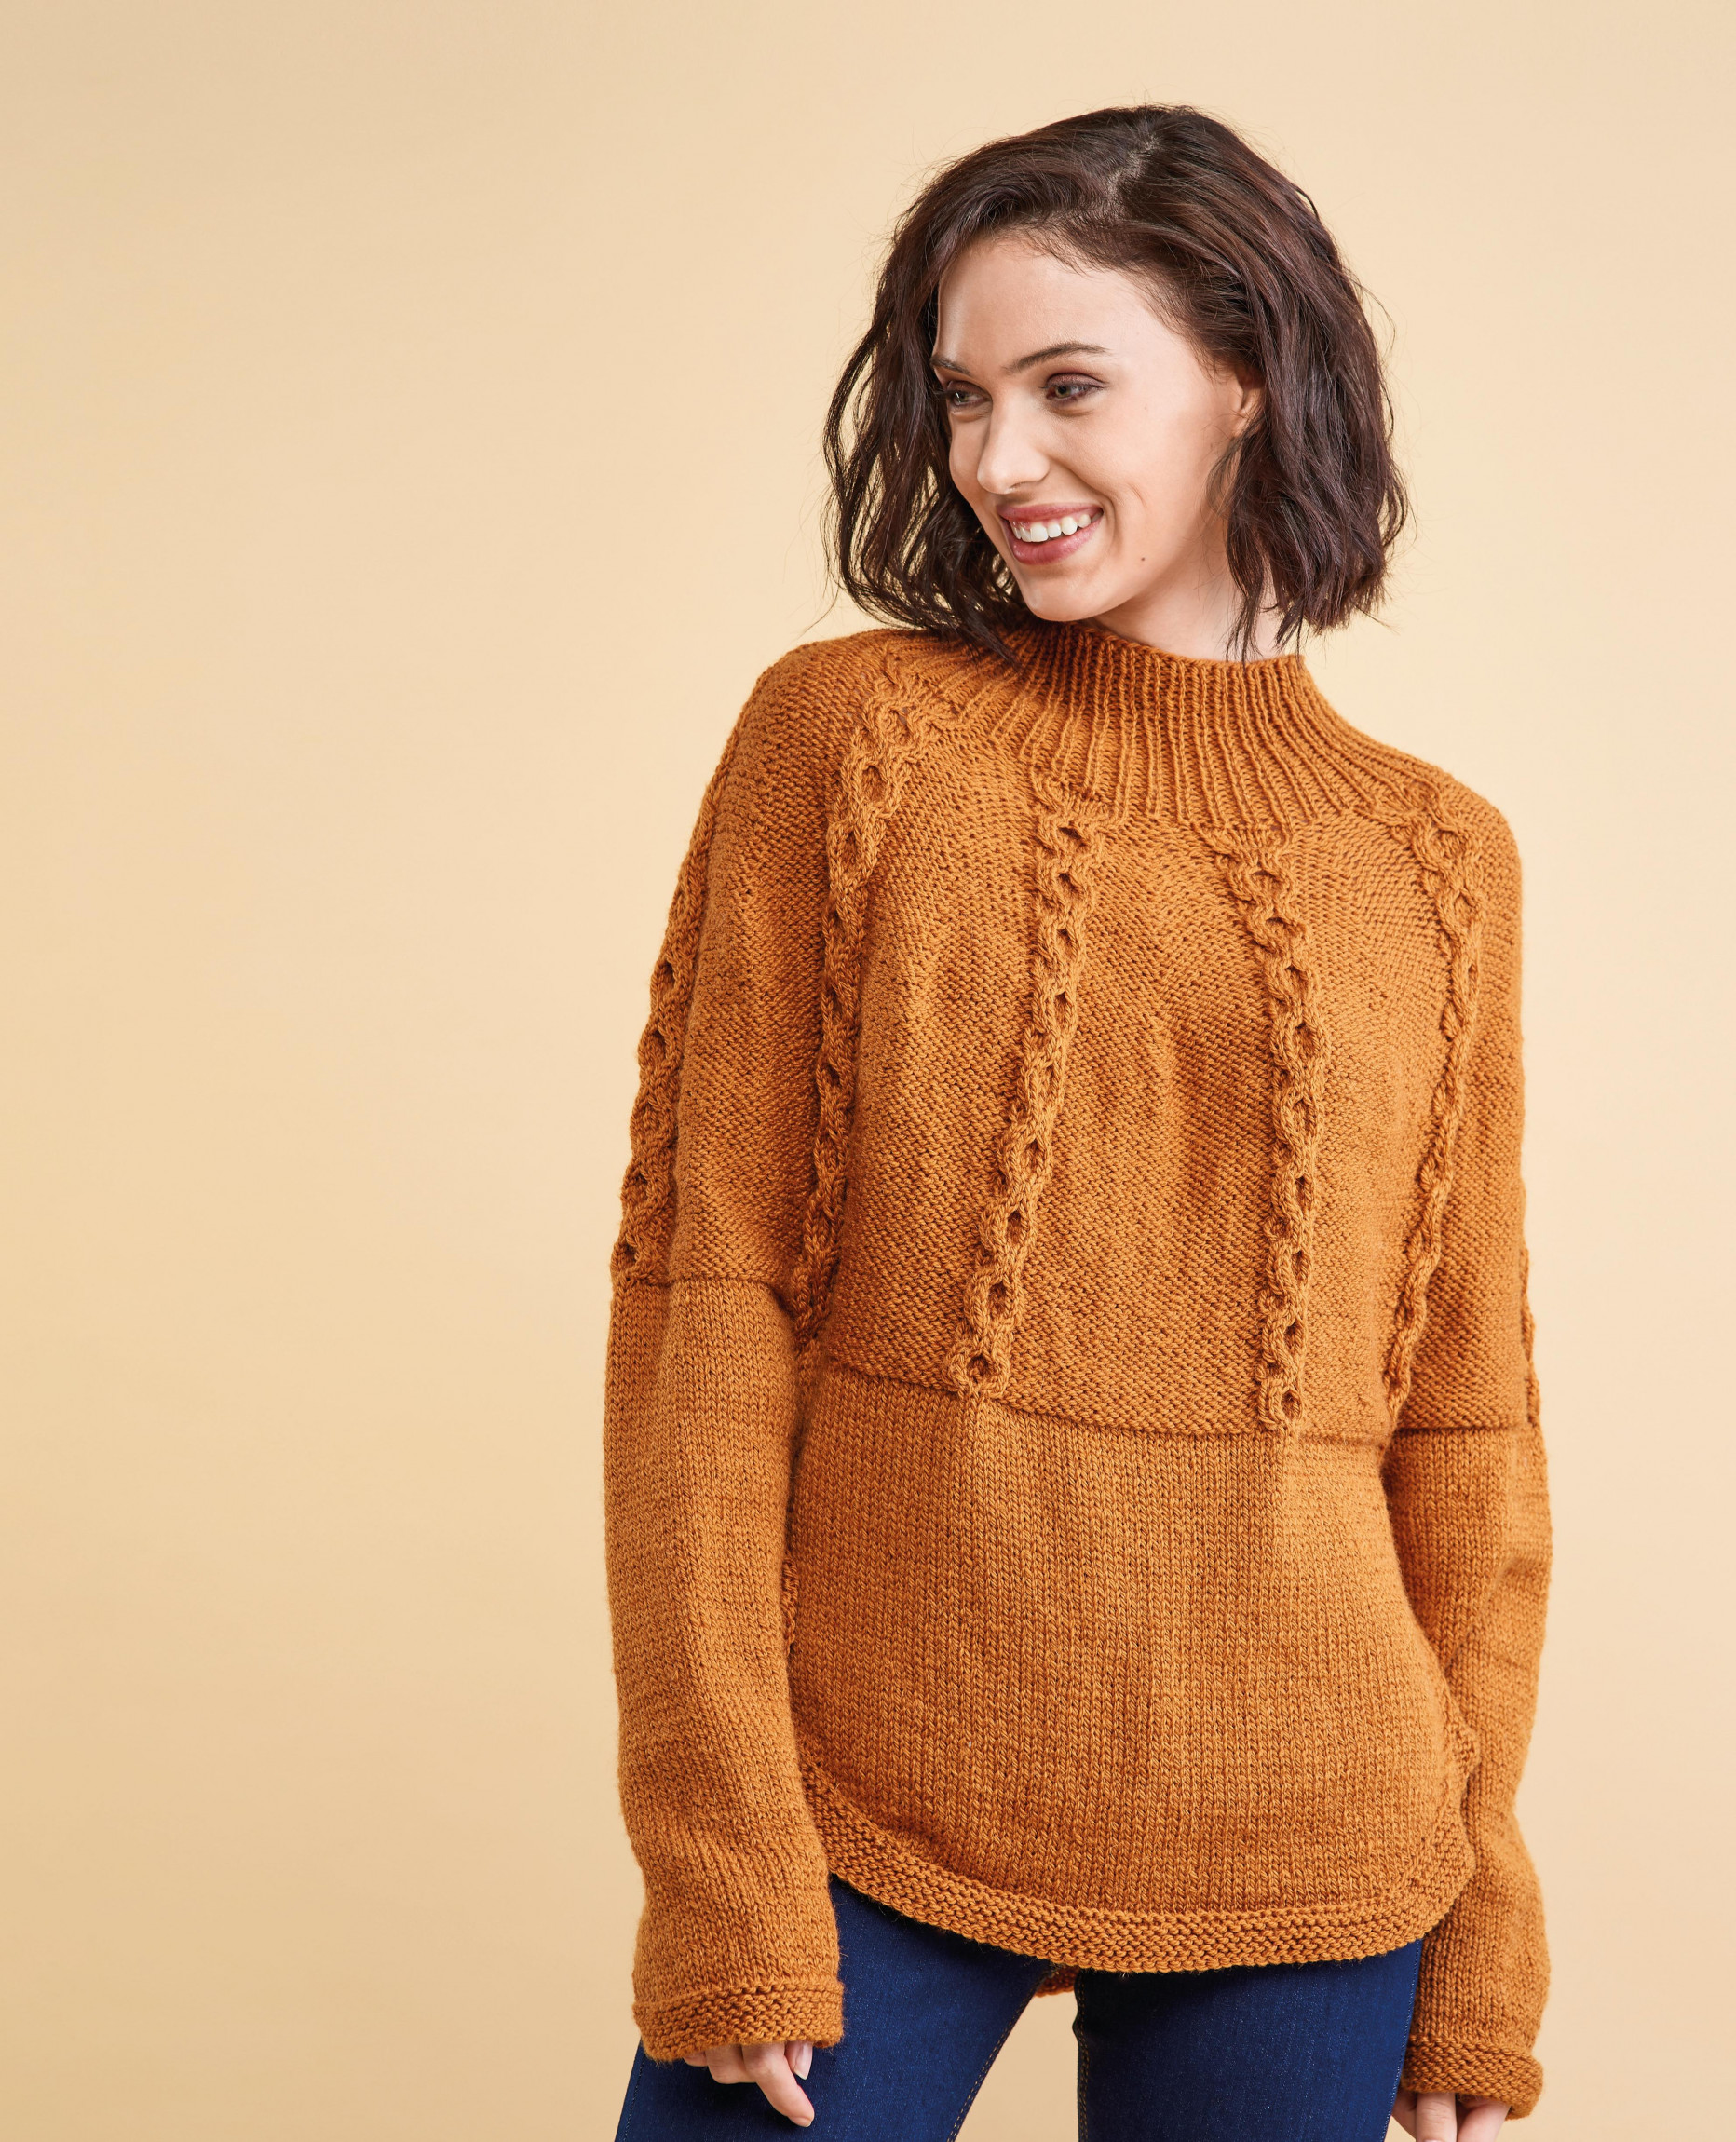 Curved Yoke Cable Sweater, Knitting Patterns